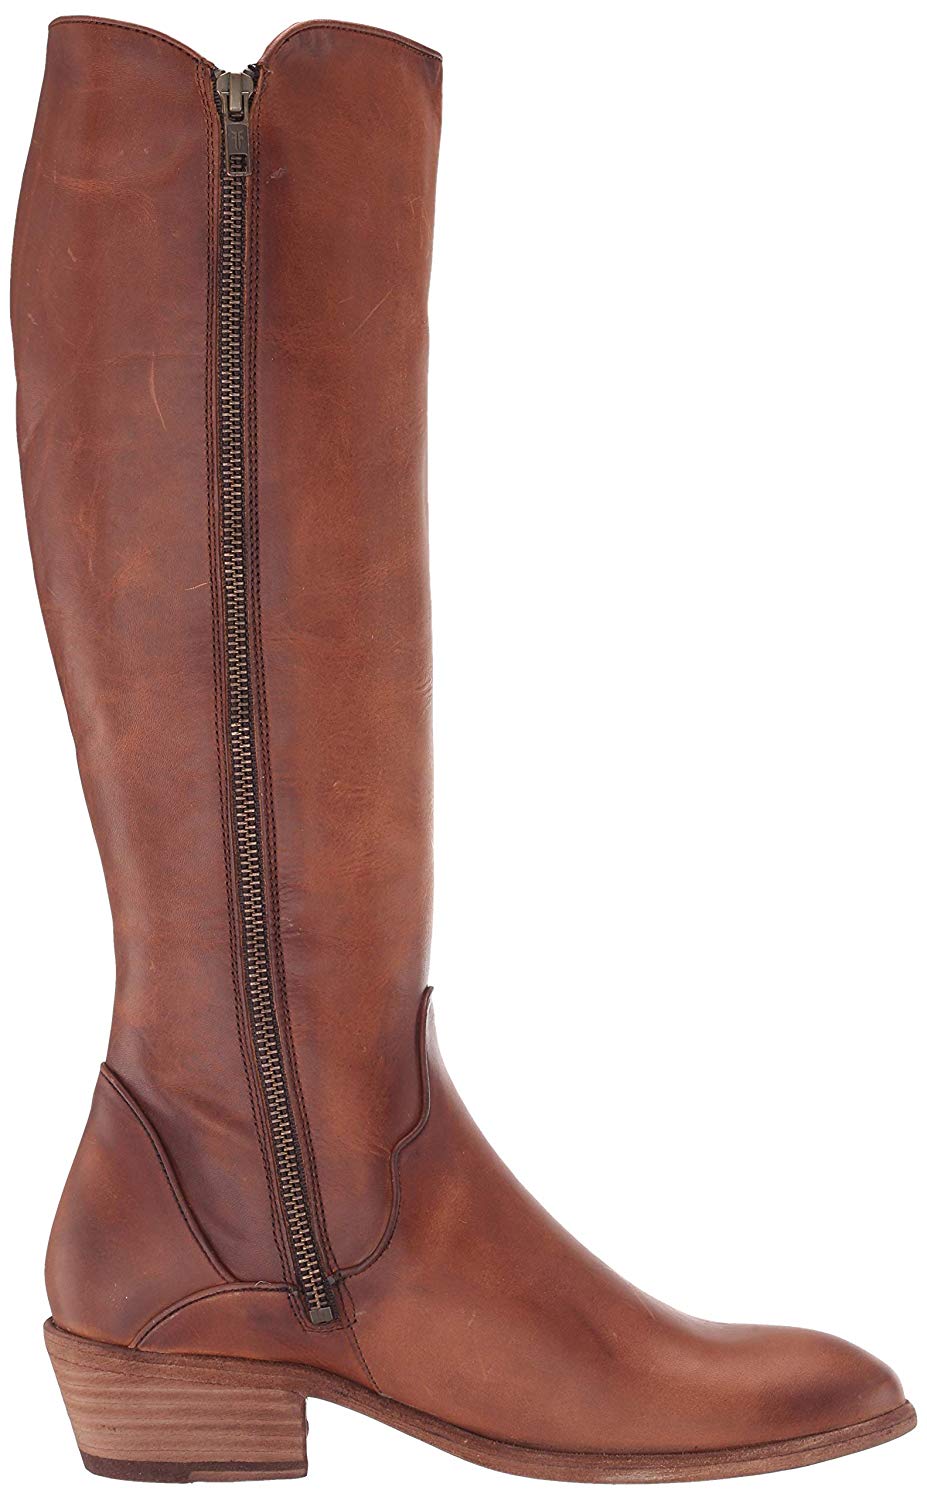 FRYE Women's Carson Piping Tall Knee High Boot, Caramel, Size 7.5 NzNh ...